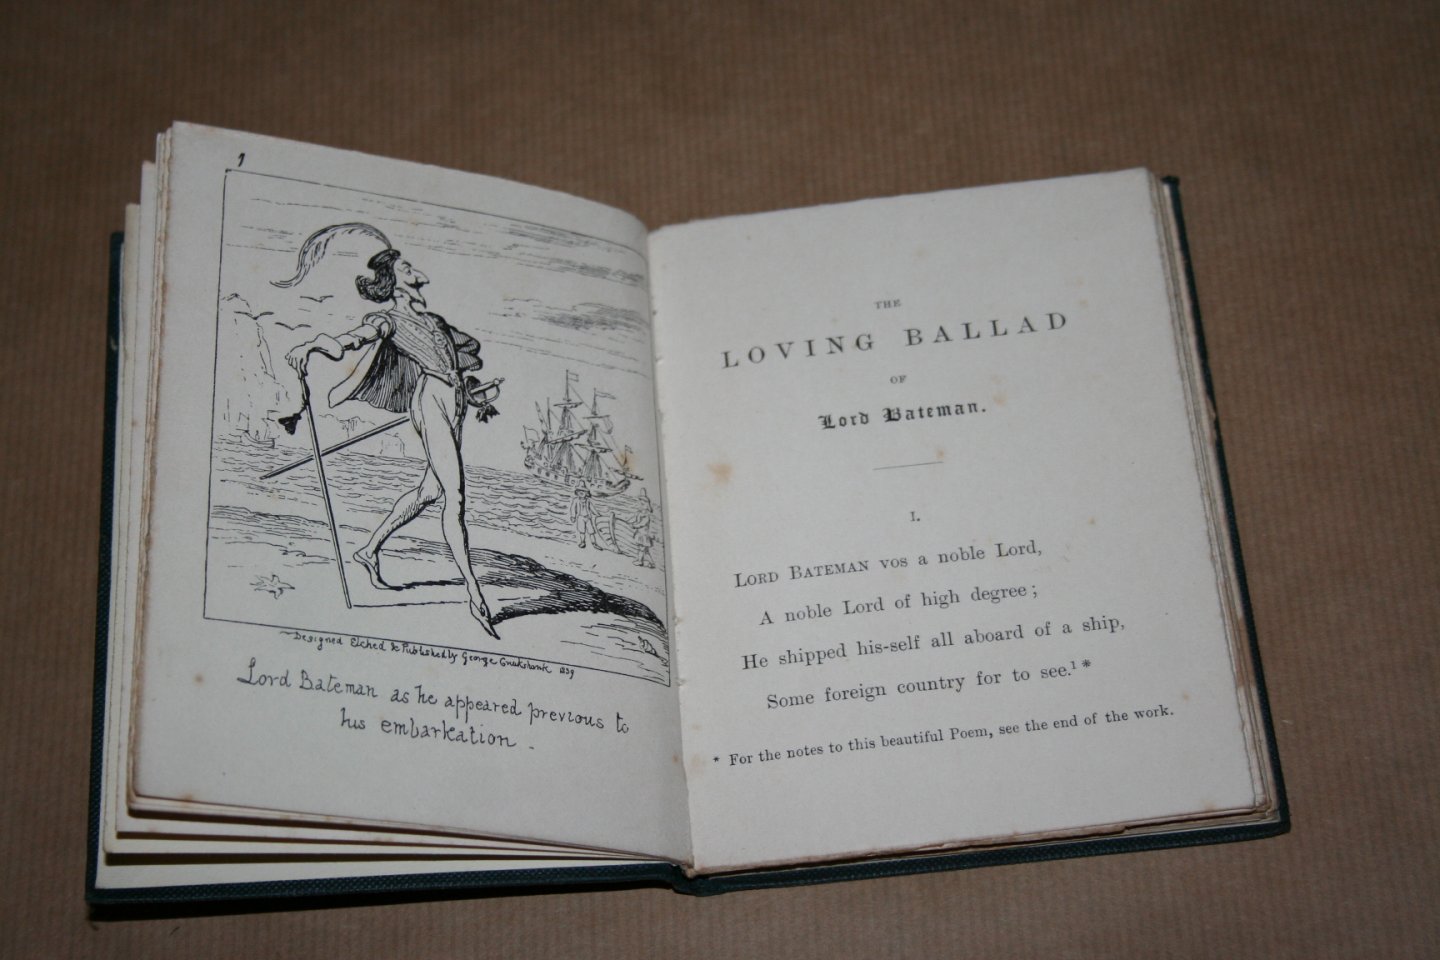 With eleven plates by George Cruikshank - The loving ballad of Lord Bateman